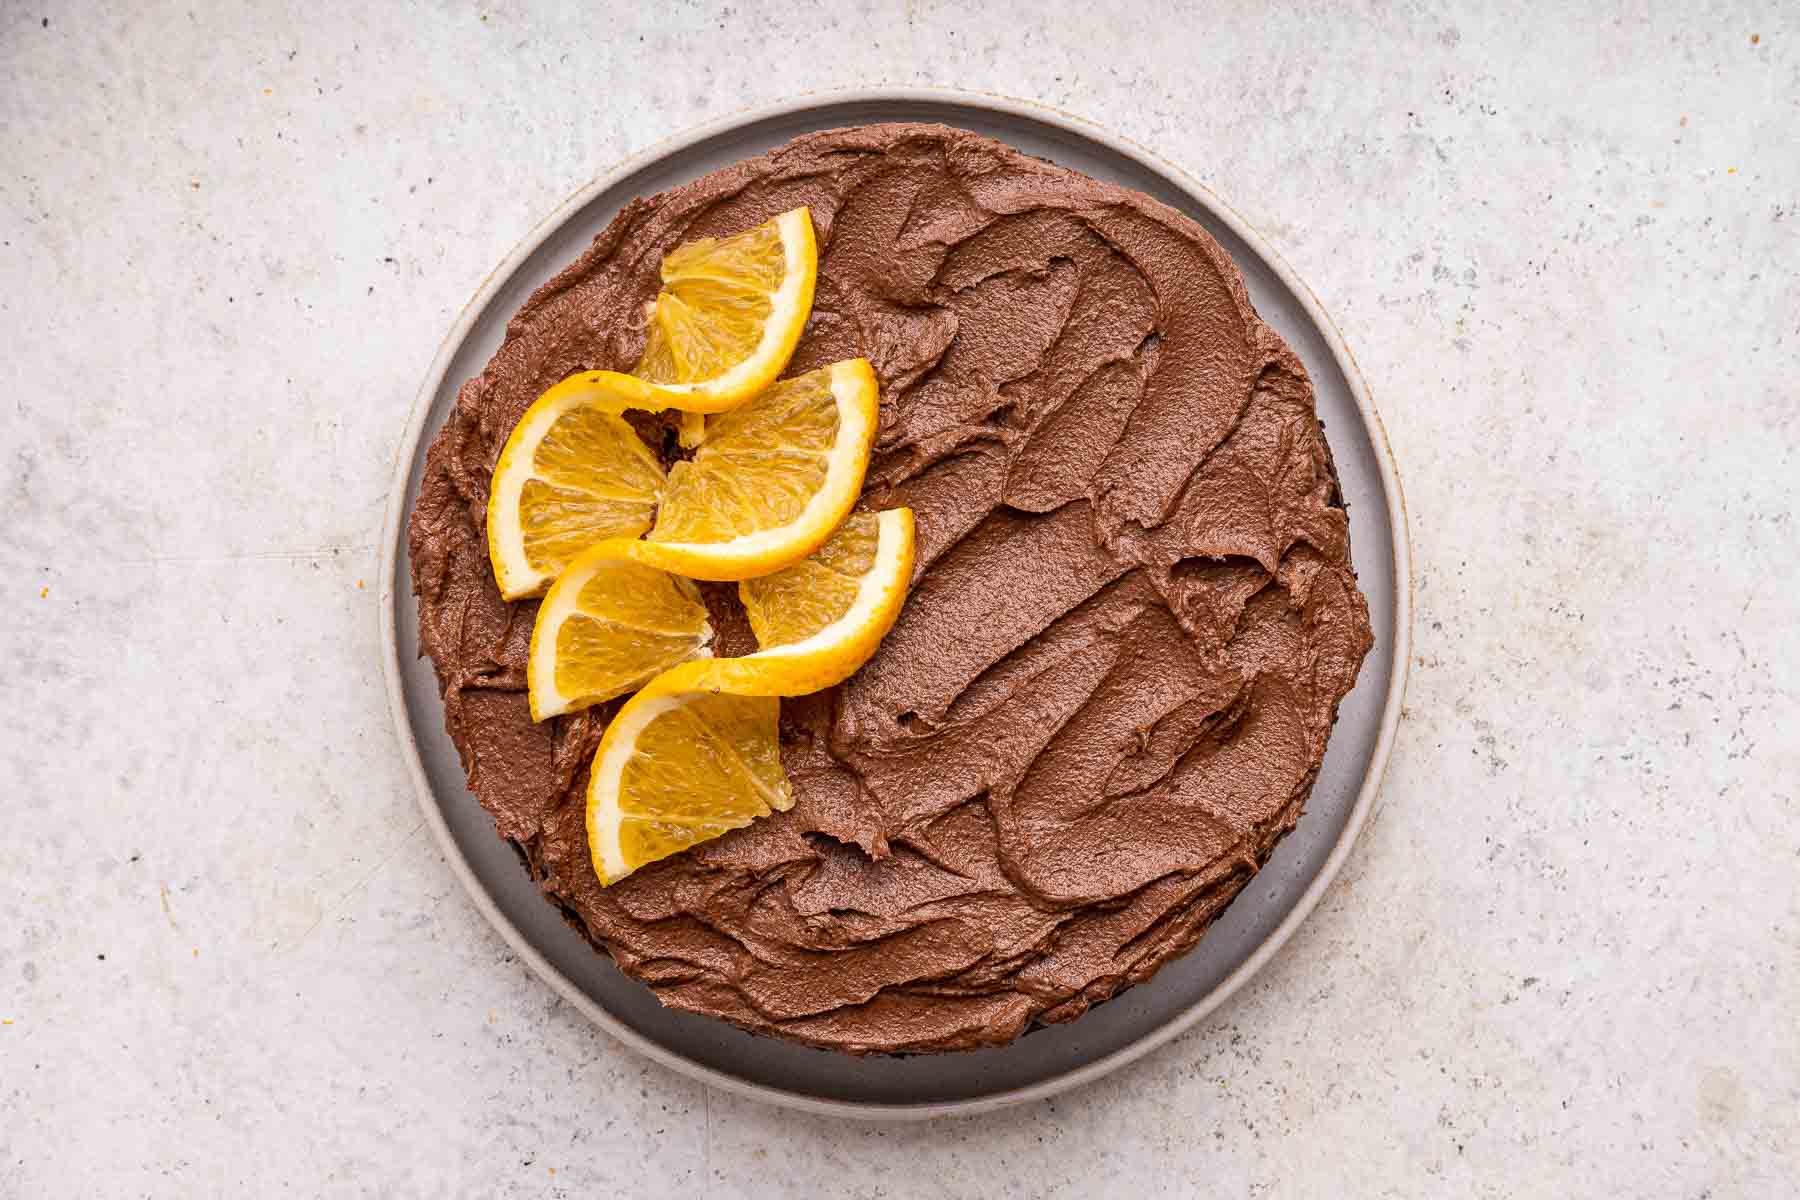 Decorating a chocolate orange cake with frosting and thinly sliced oranges.